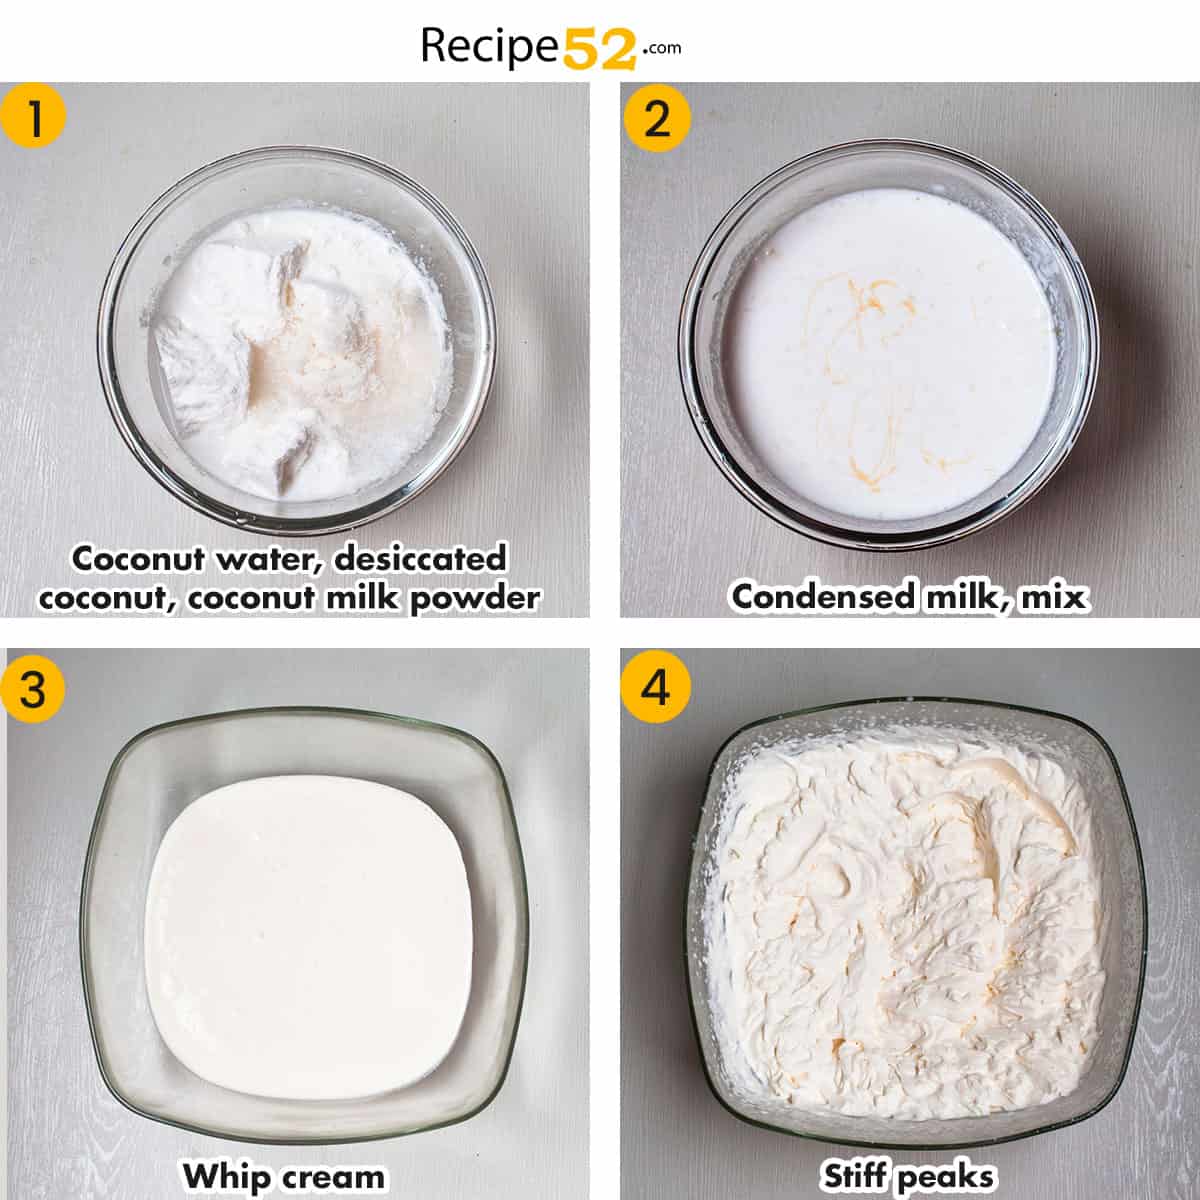 Steps to make coconut county ice cream.